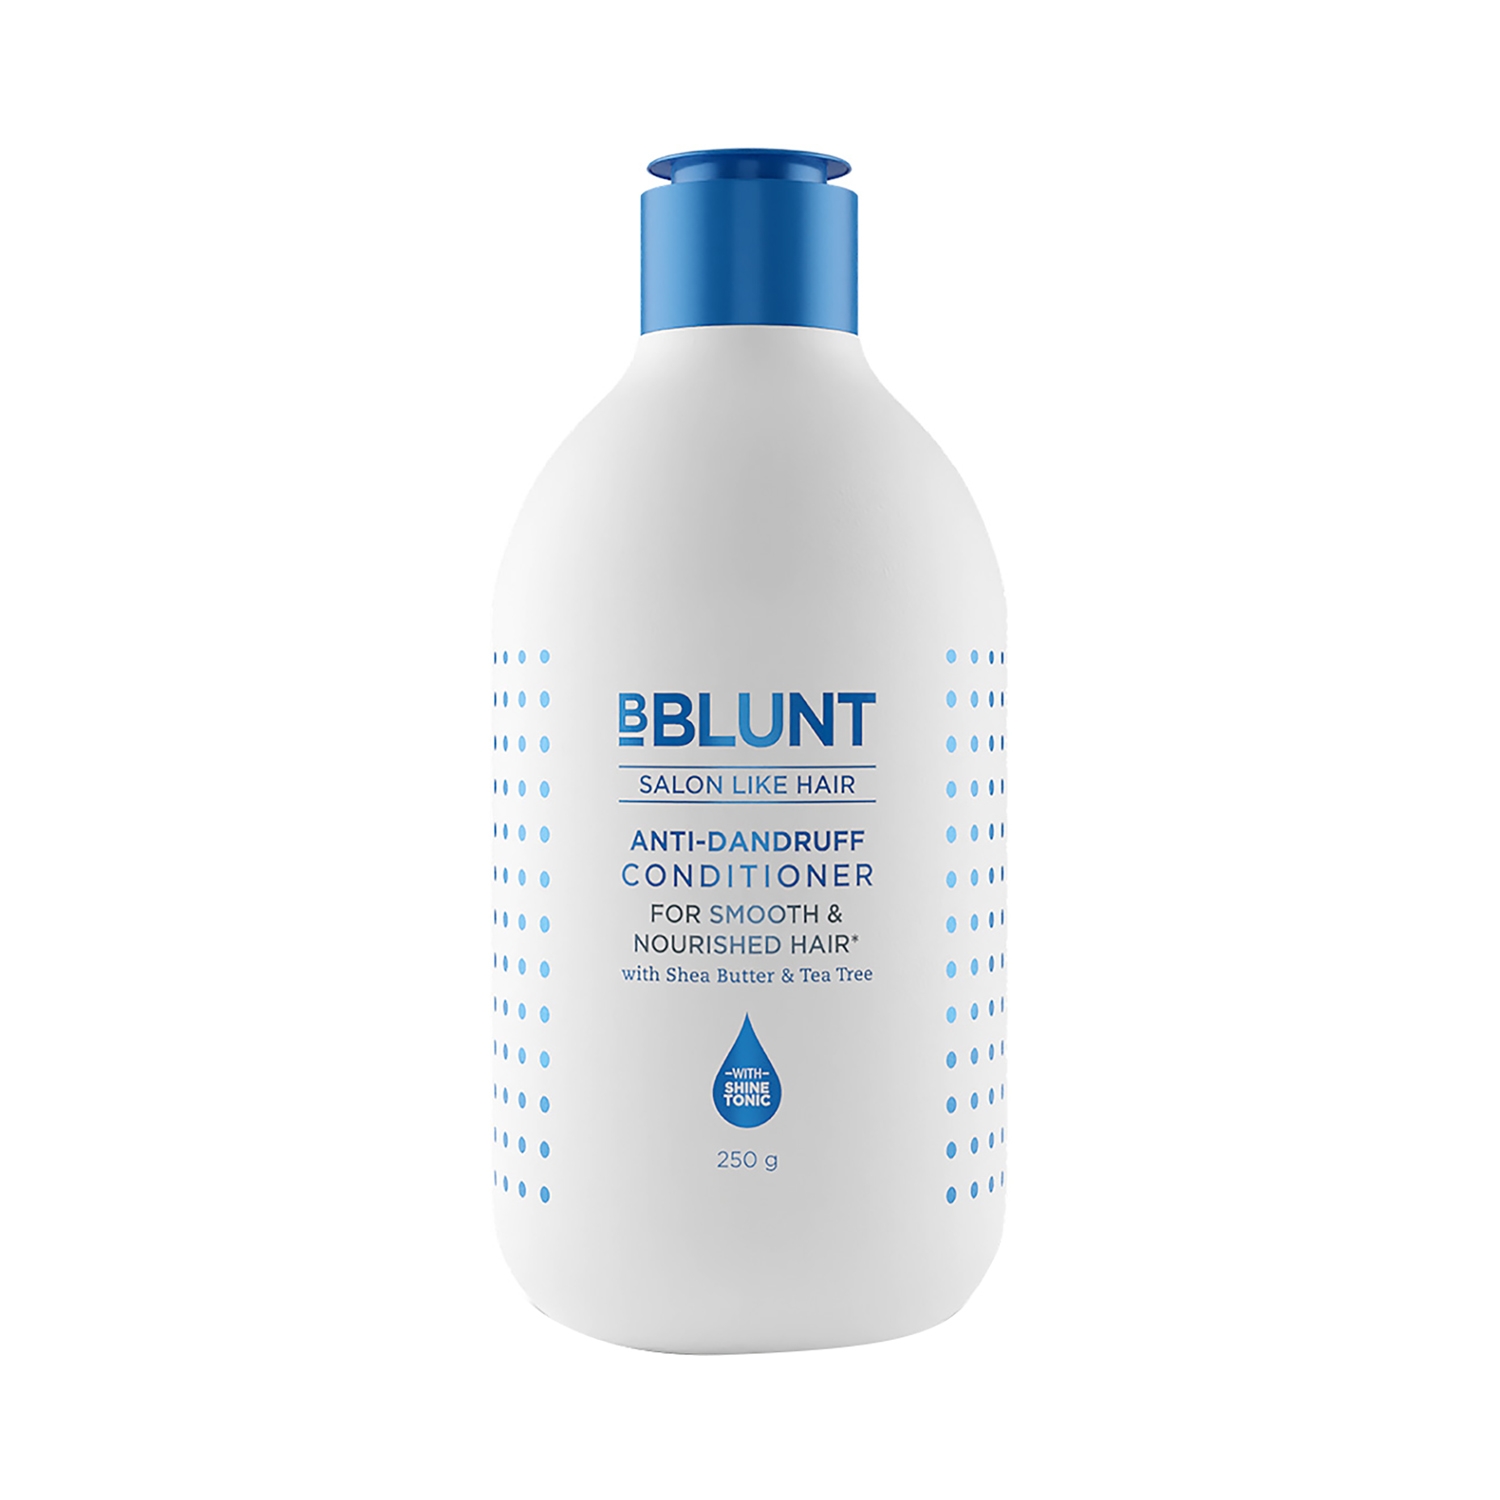 BBlunt | BBlunt Anti-Dandruff Conditioner For Smooth & Nourished Hair (250g)